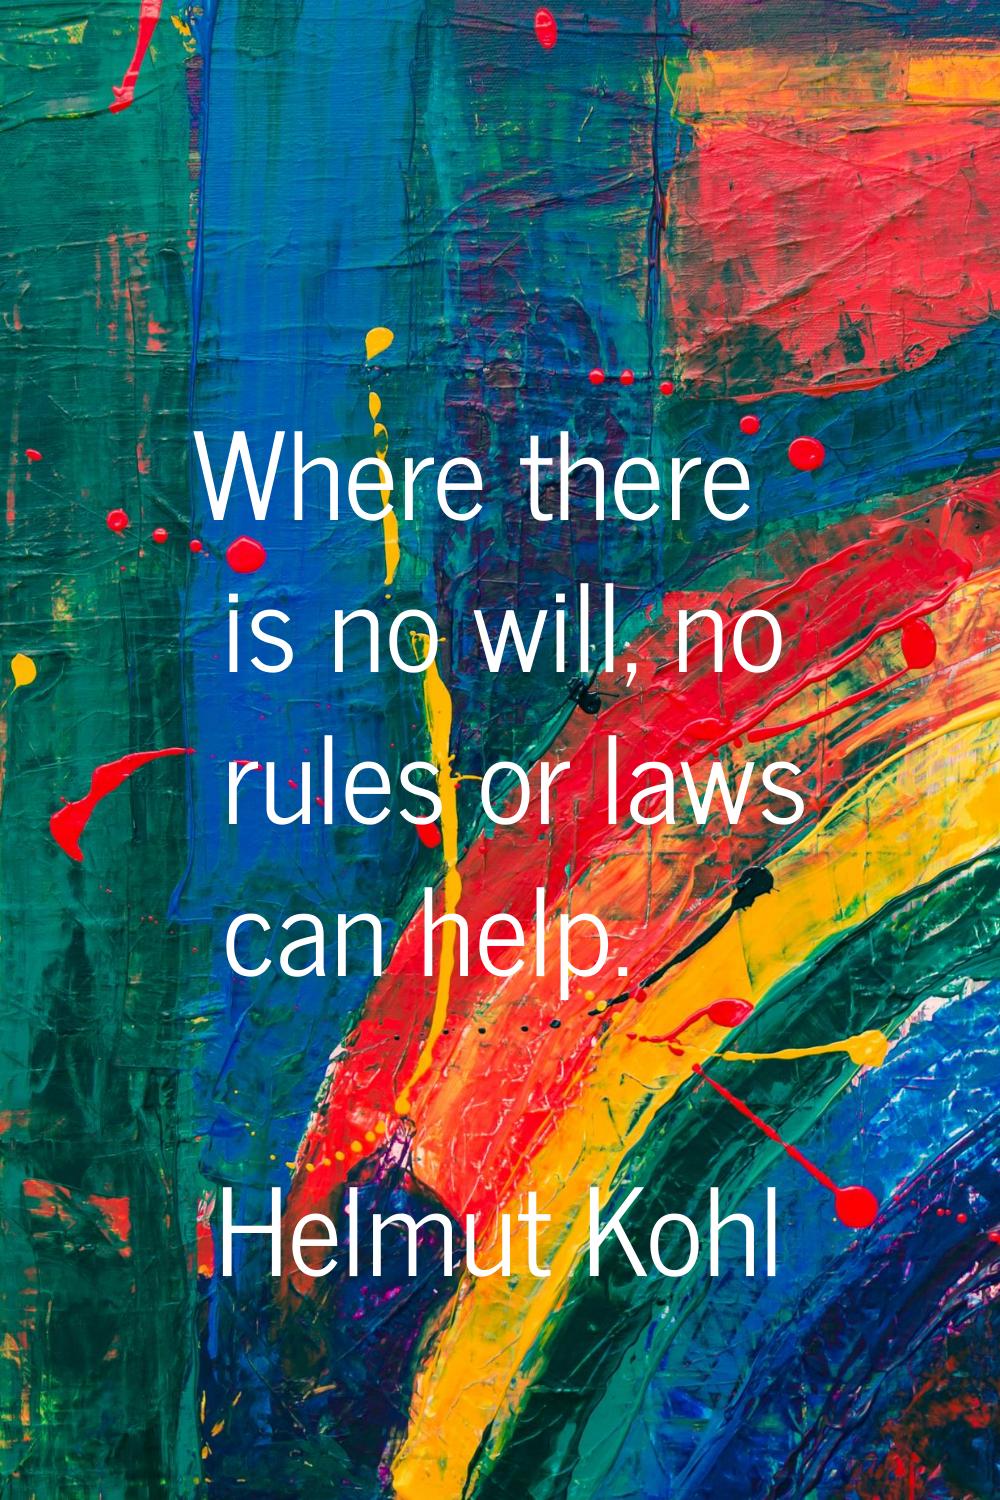 Where there is no will, no rules or laws can help.